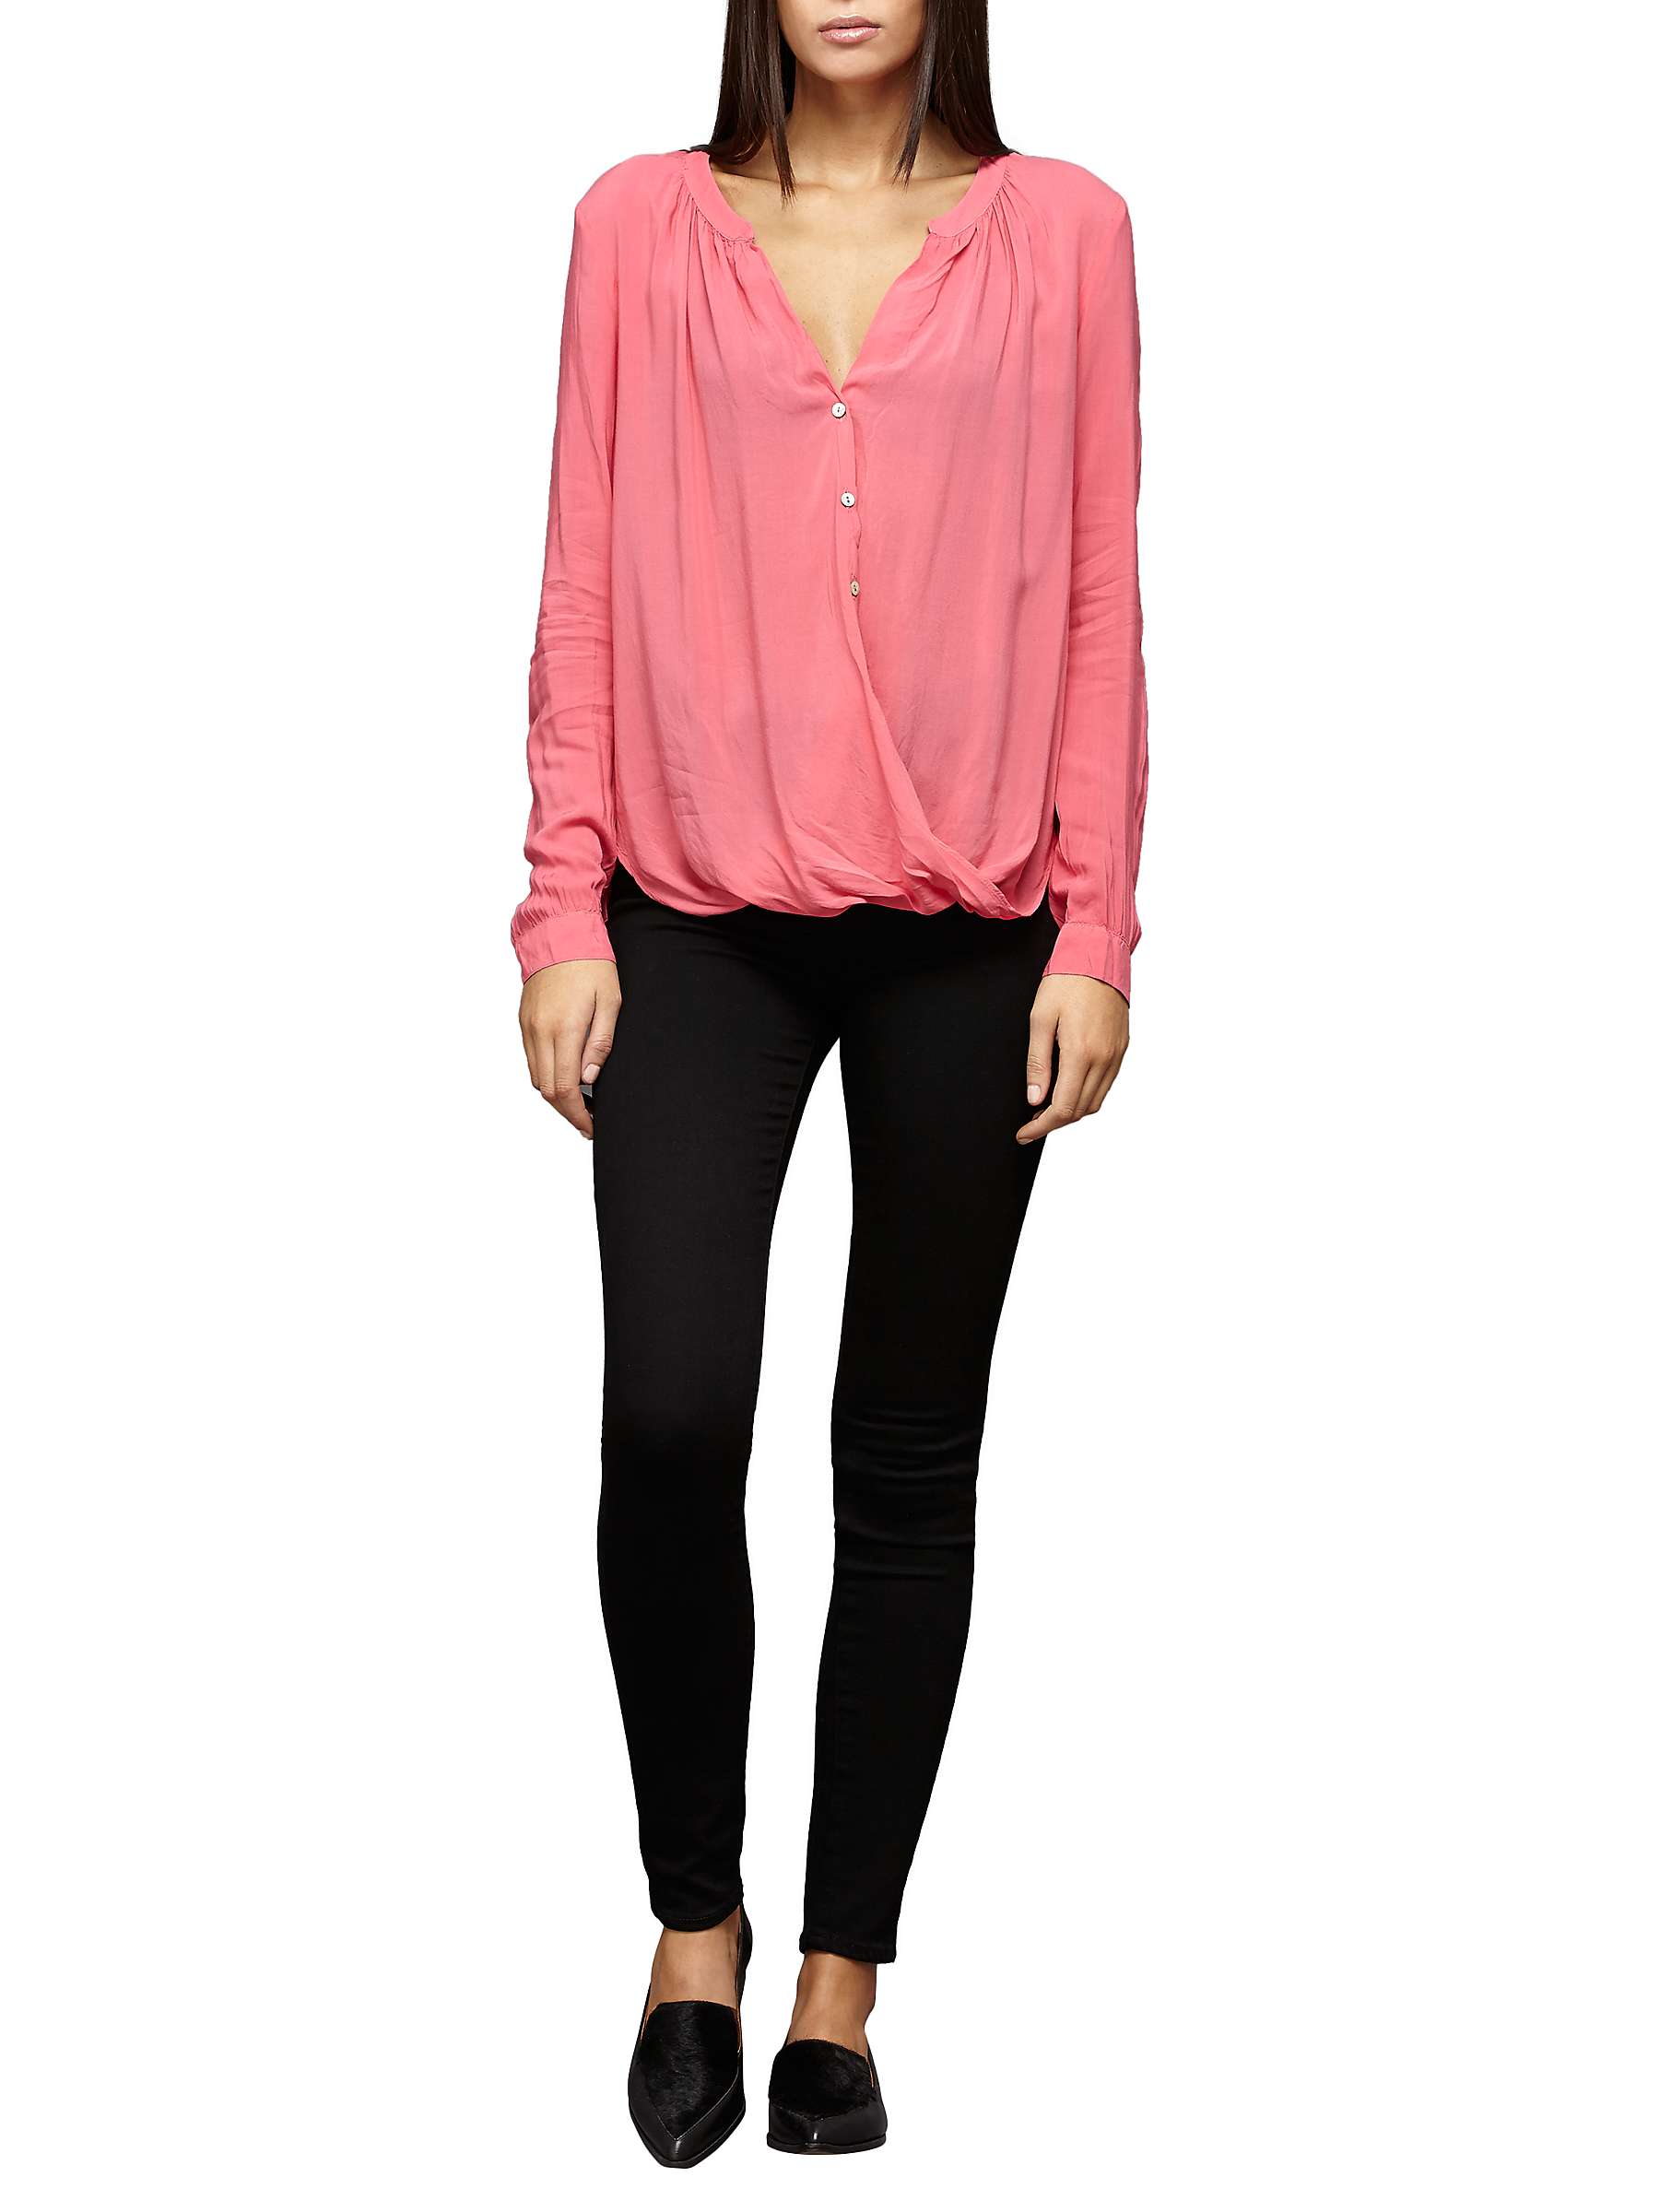 Buy PAIGE Margot High Rise Ultra Skinny Jeans, Black Shadow Online at johnlewis.com